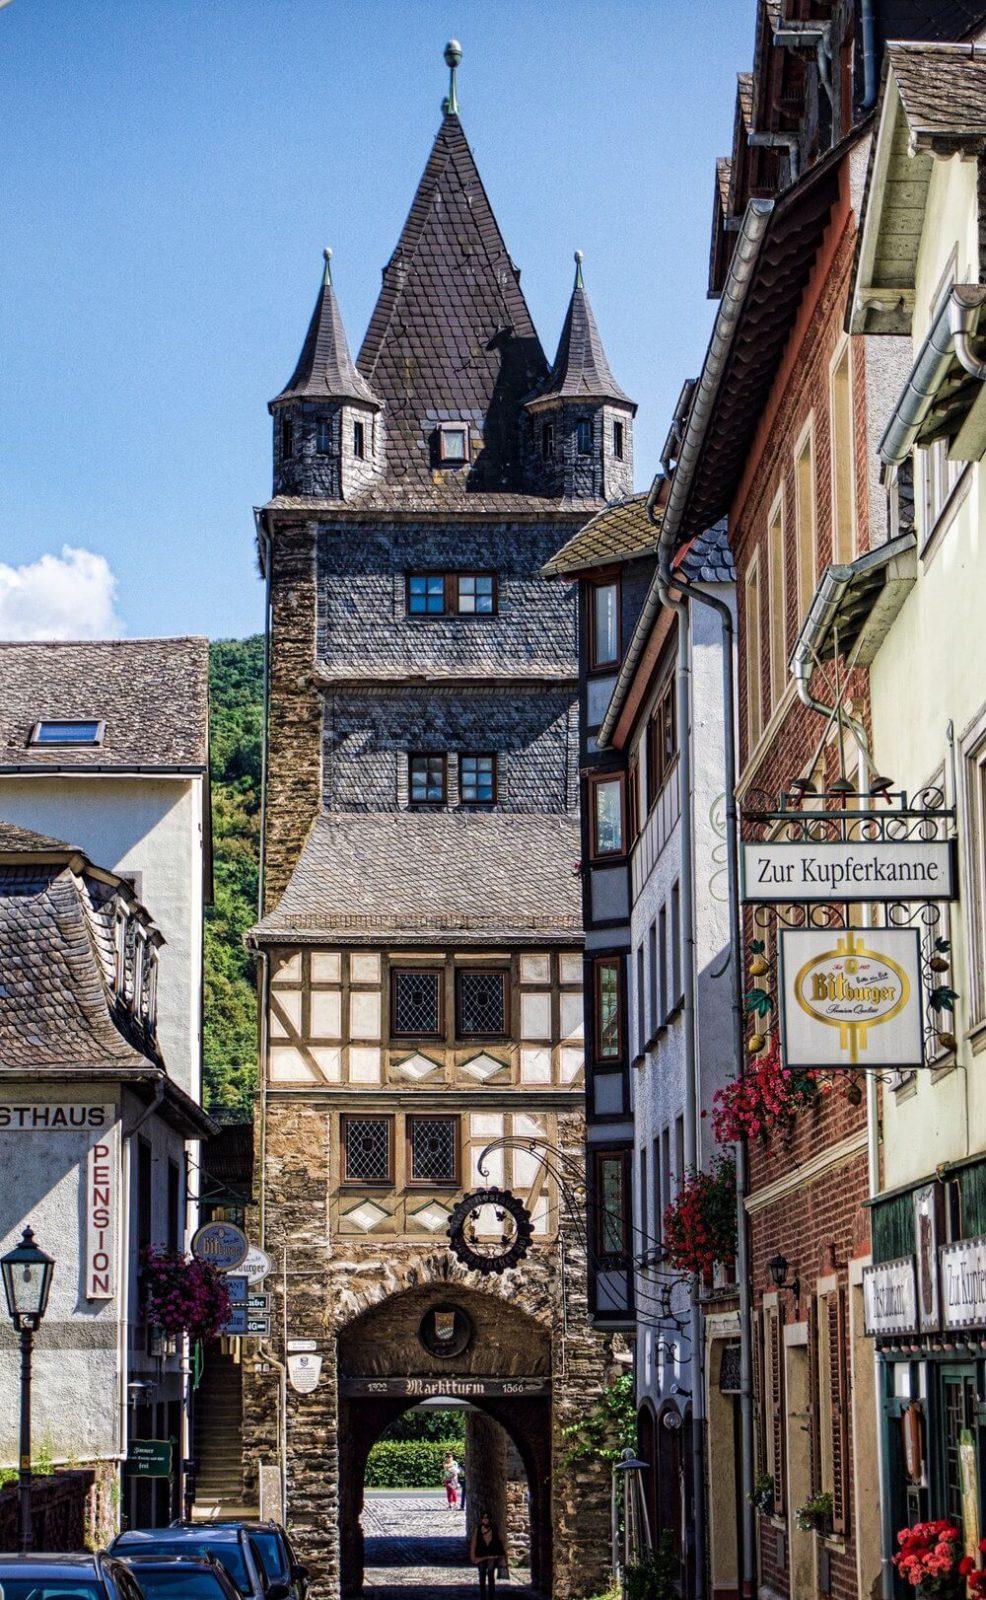 Tower at the end of the street in Bacharach Germany